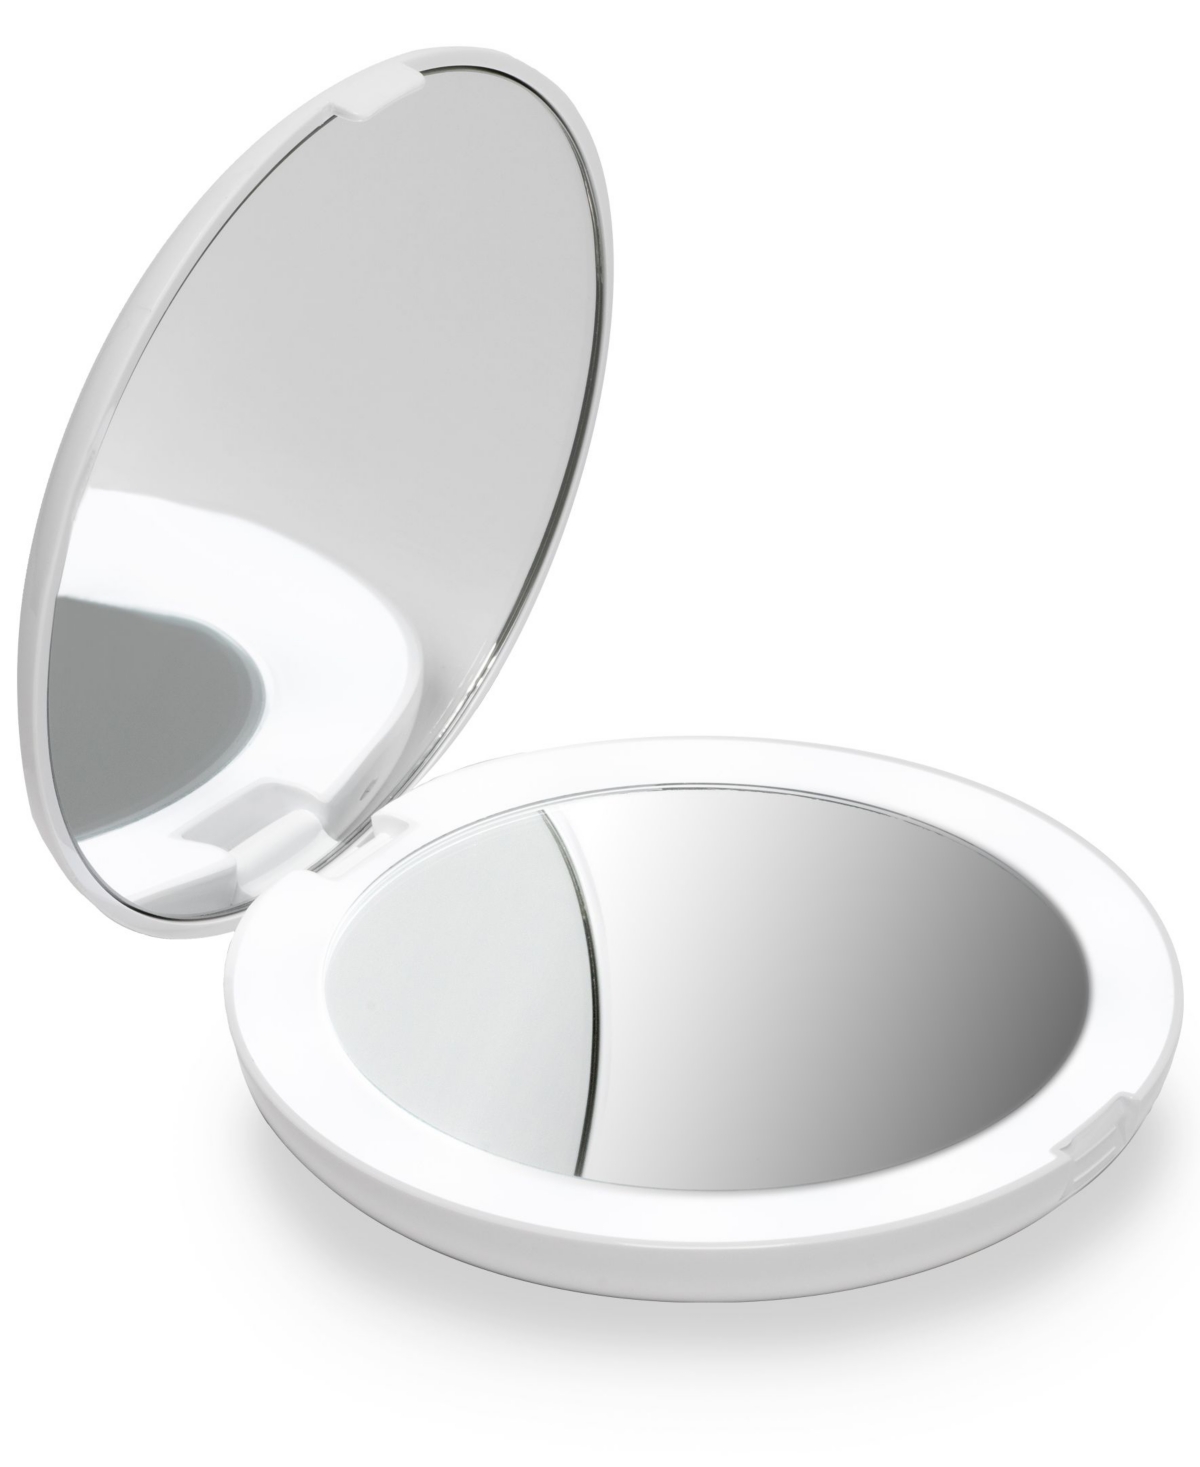 Lumi 5" Compact Mirror with Led Lights - White